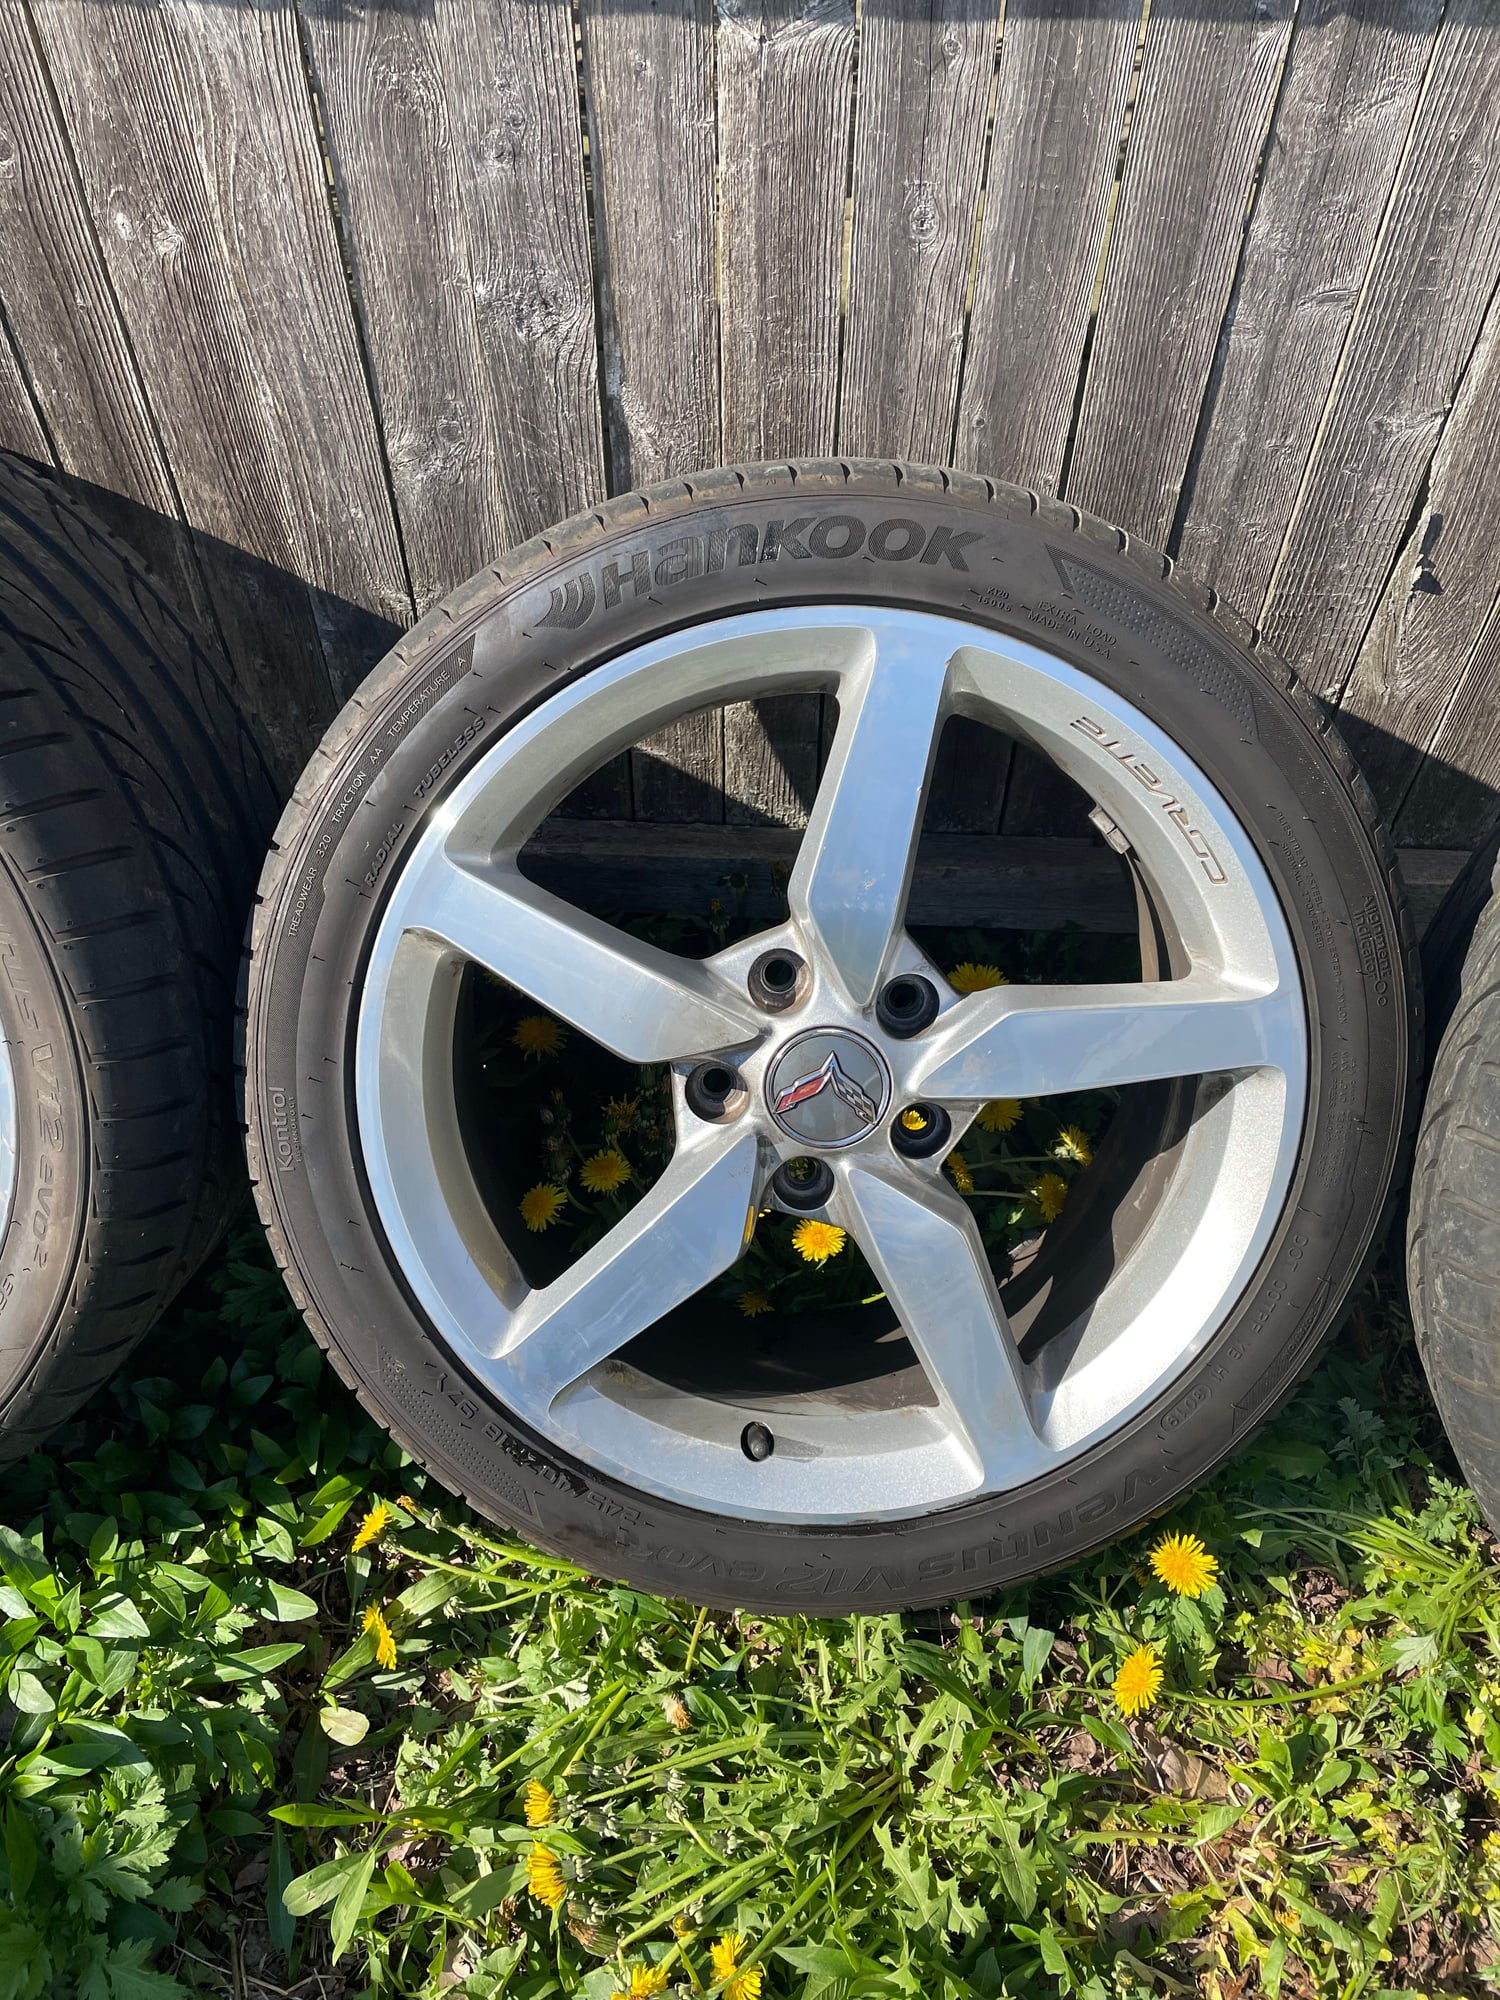 Wheels and Tires/Axles - C6 rims and tires - Used - 2005 to 2013 Chevrolet Corvette - Massapequa, NY 11758, United States